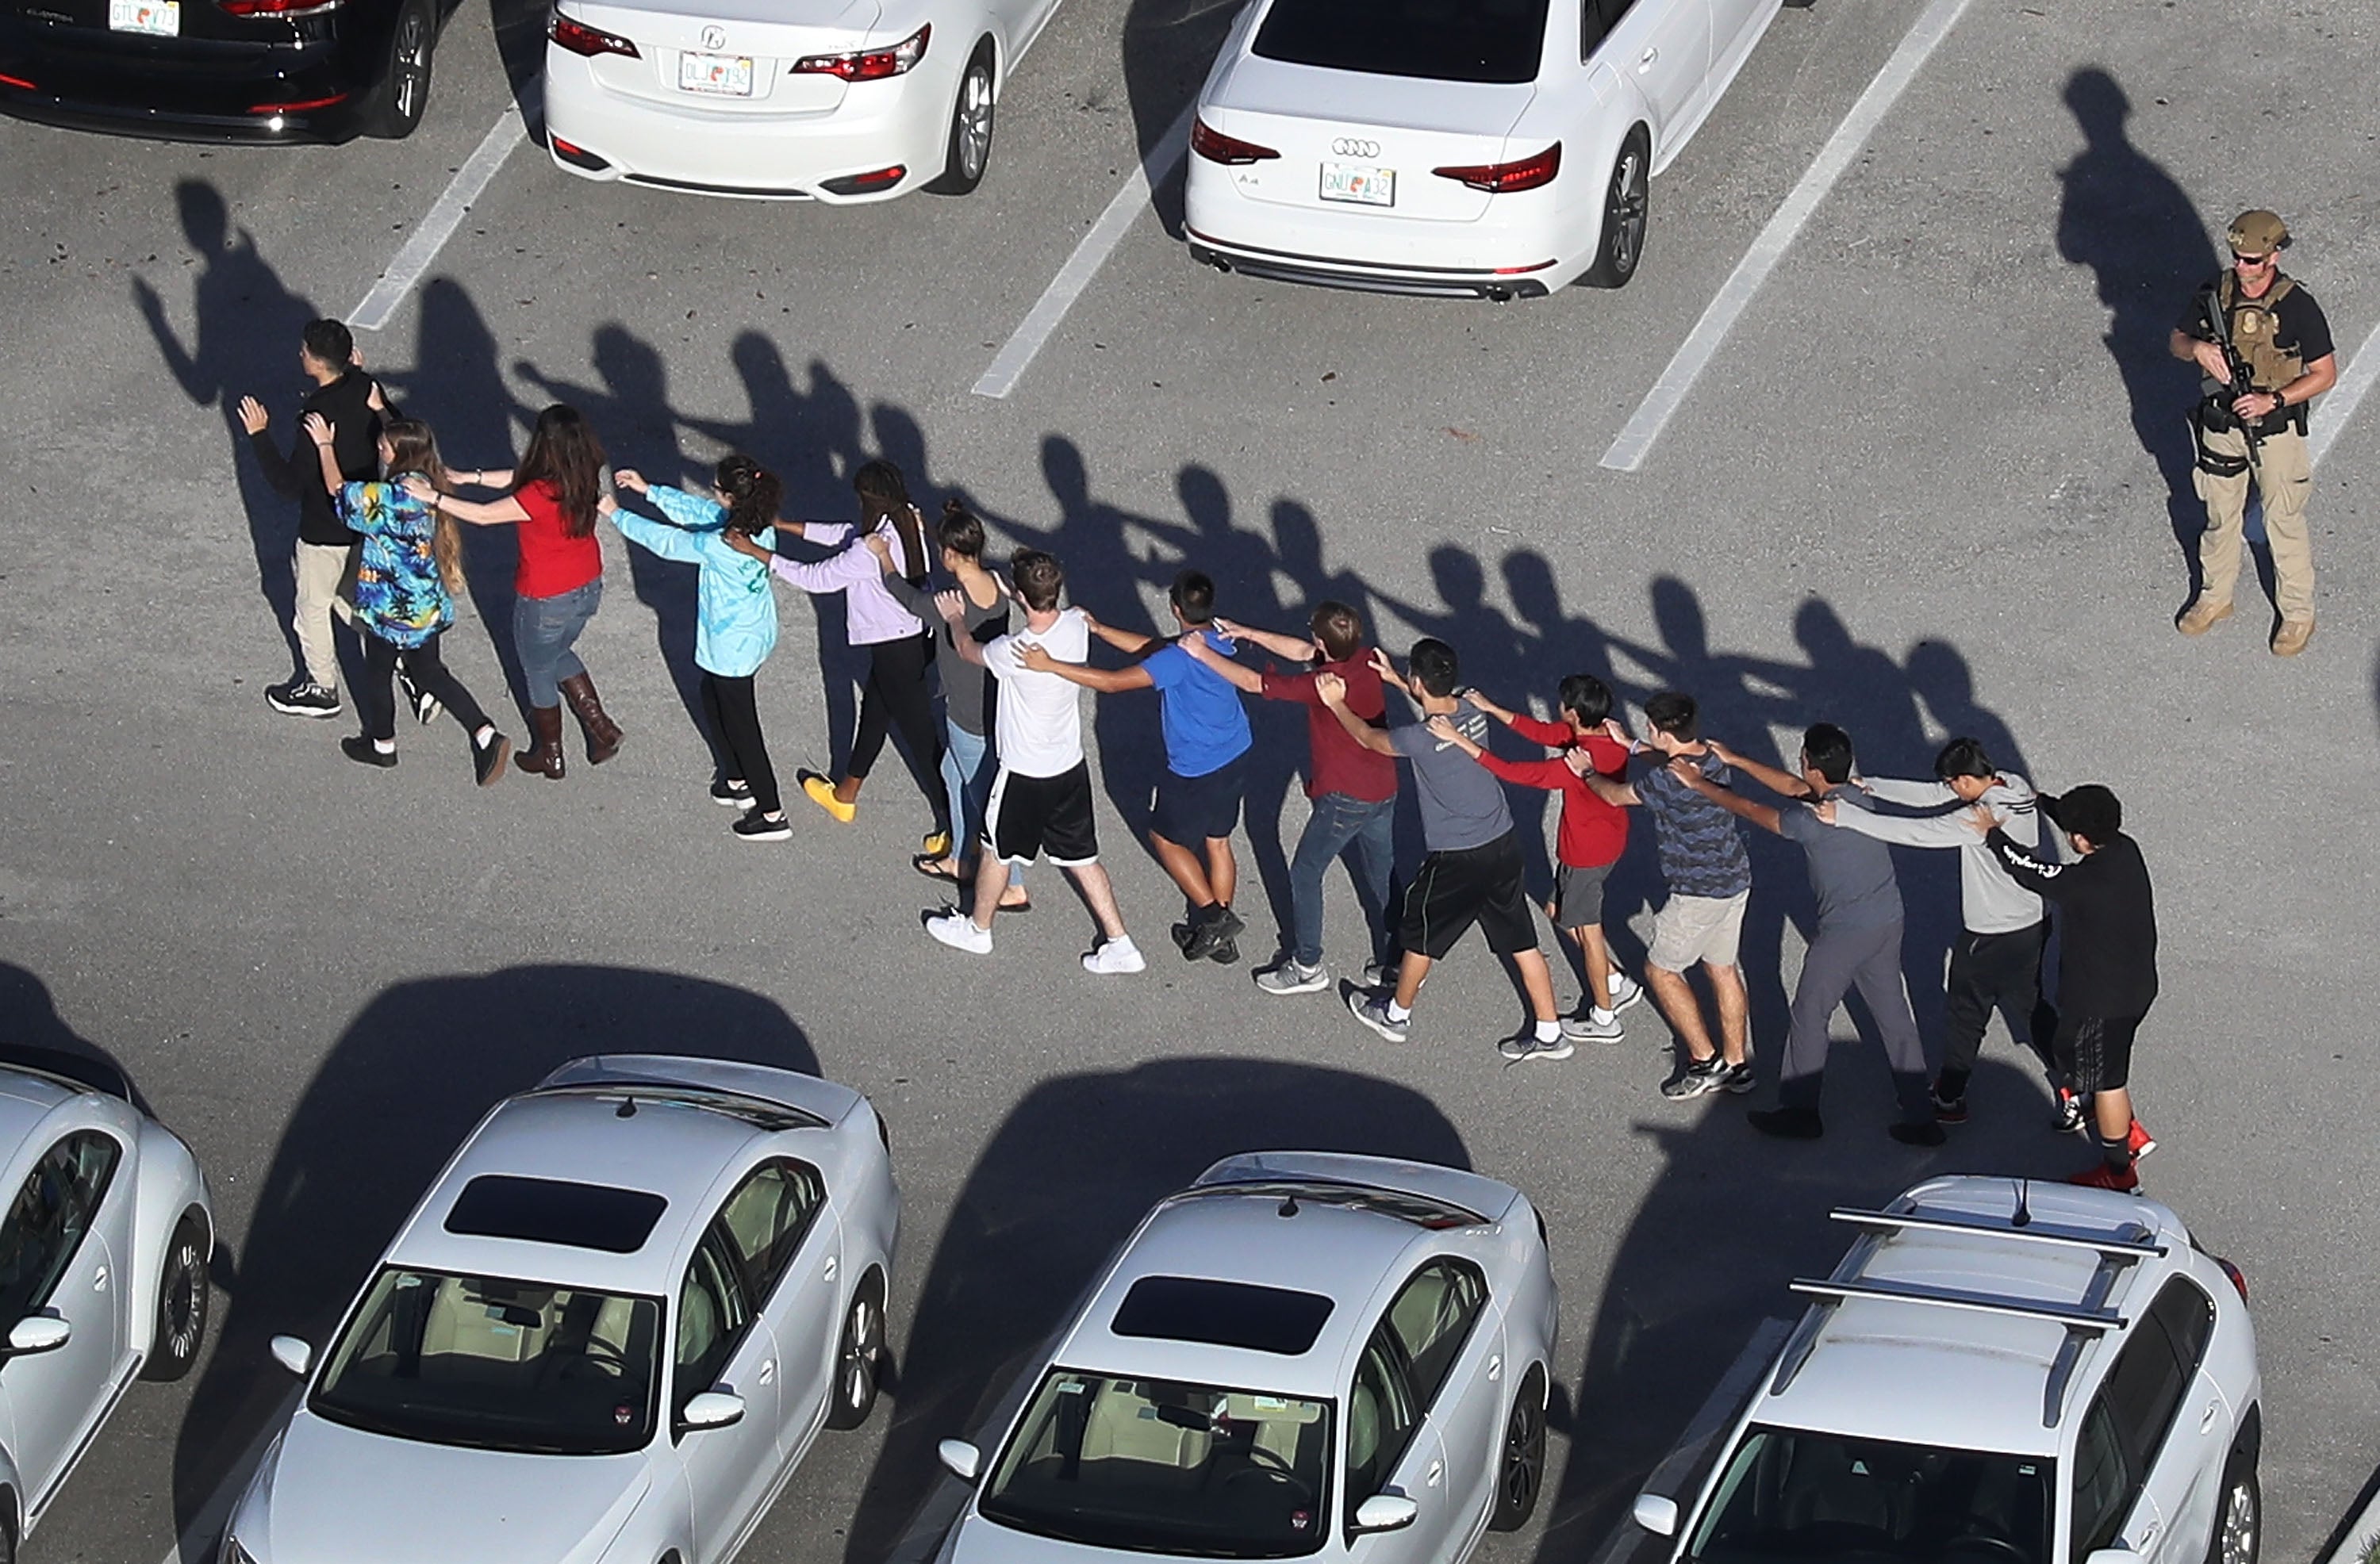 Students walking out of Marjory Stoneman Douglas High School in Parkland, Florida, following the mass shooting on Valentine’s Day in 2018